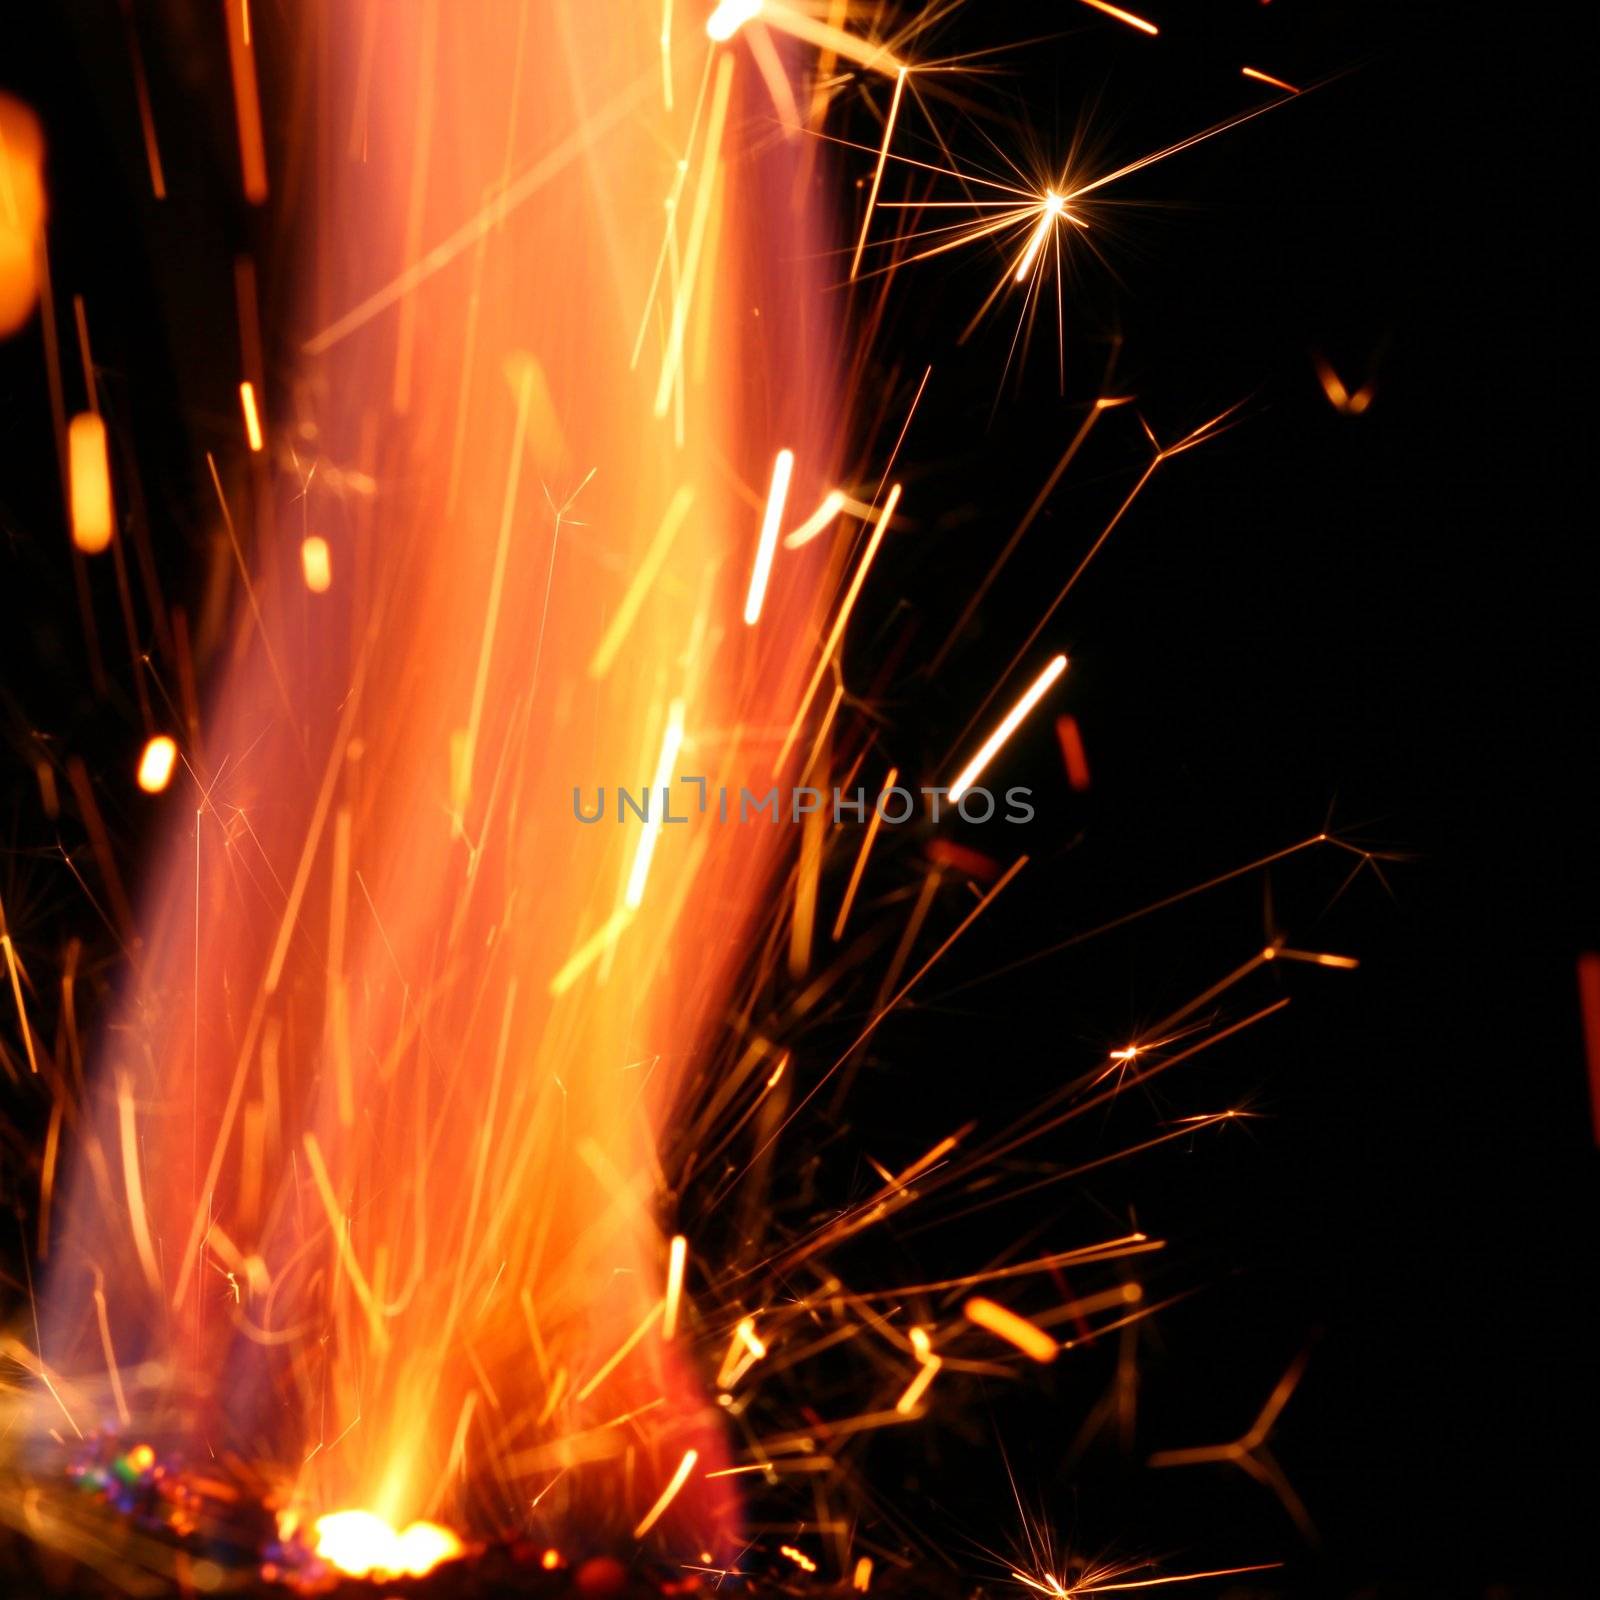 abstract spark danger flame background